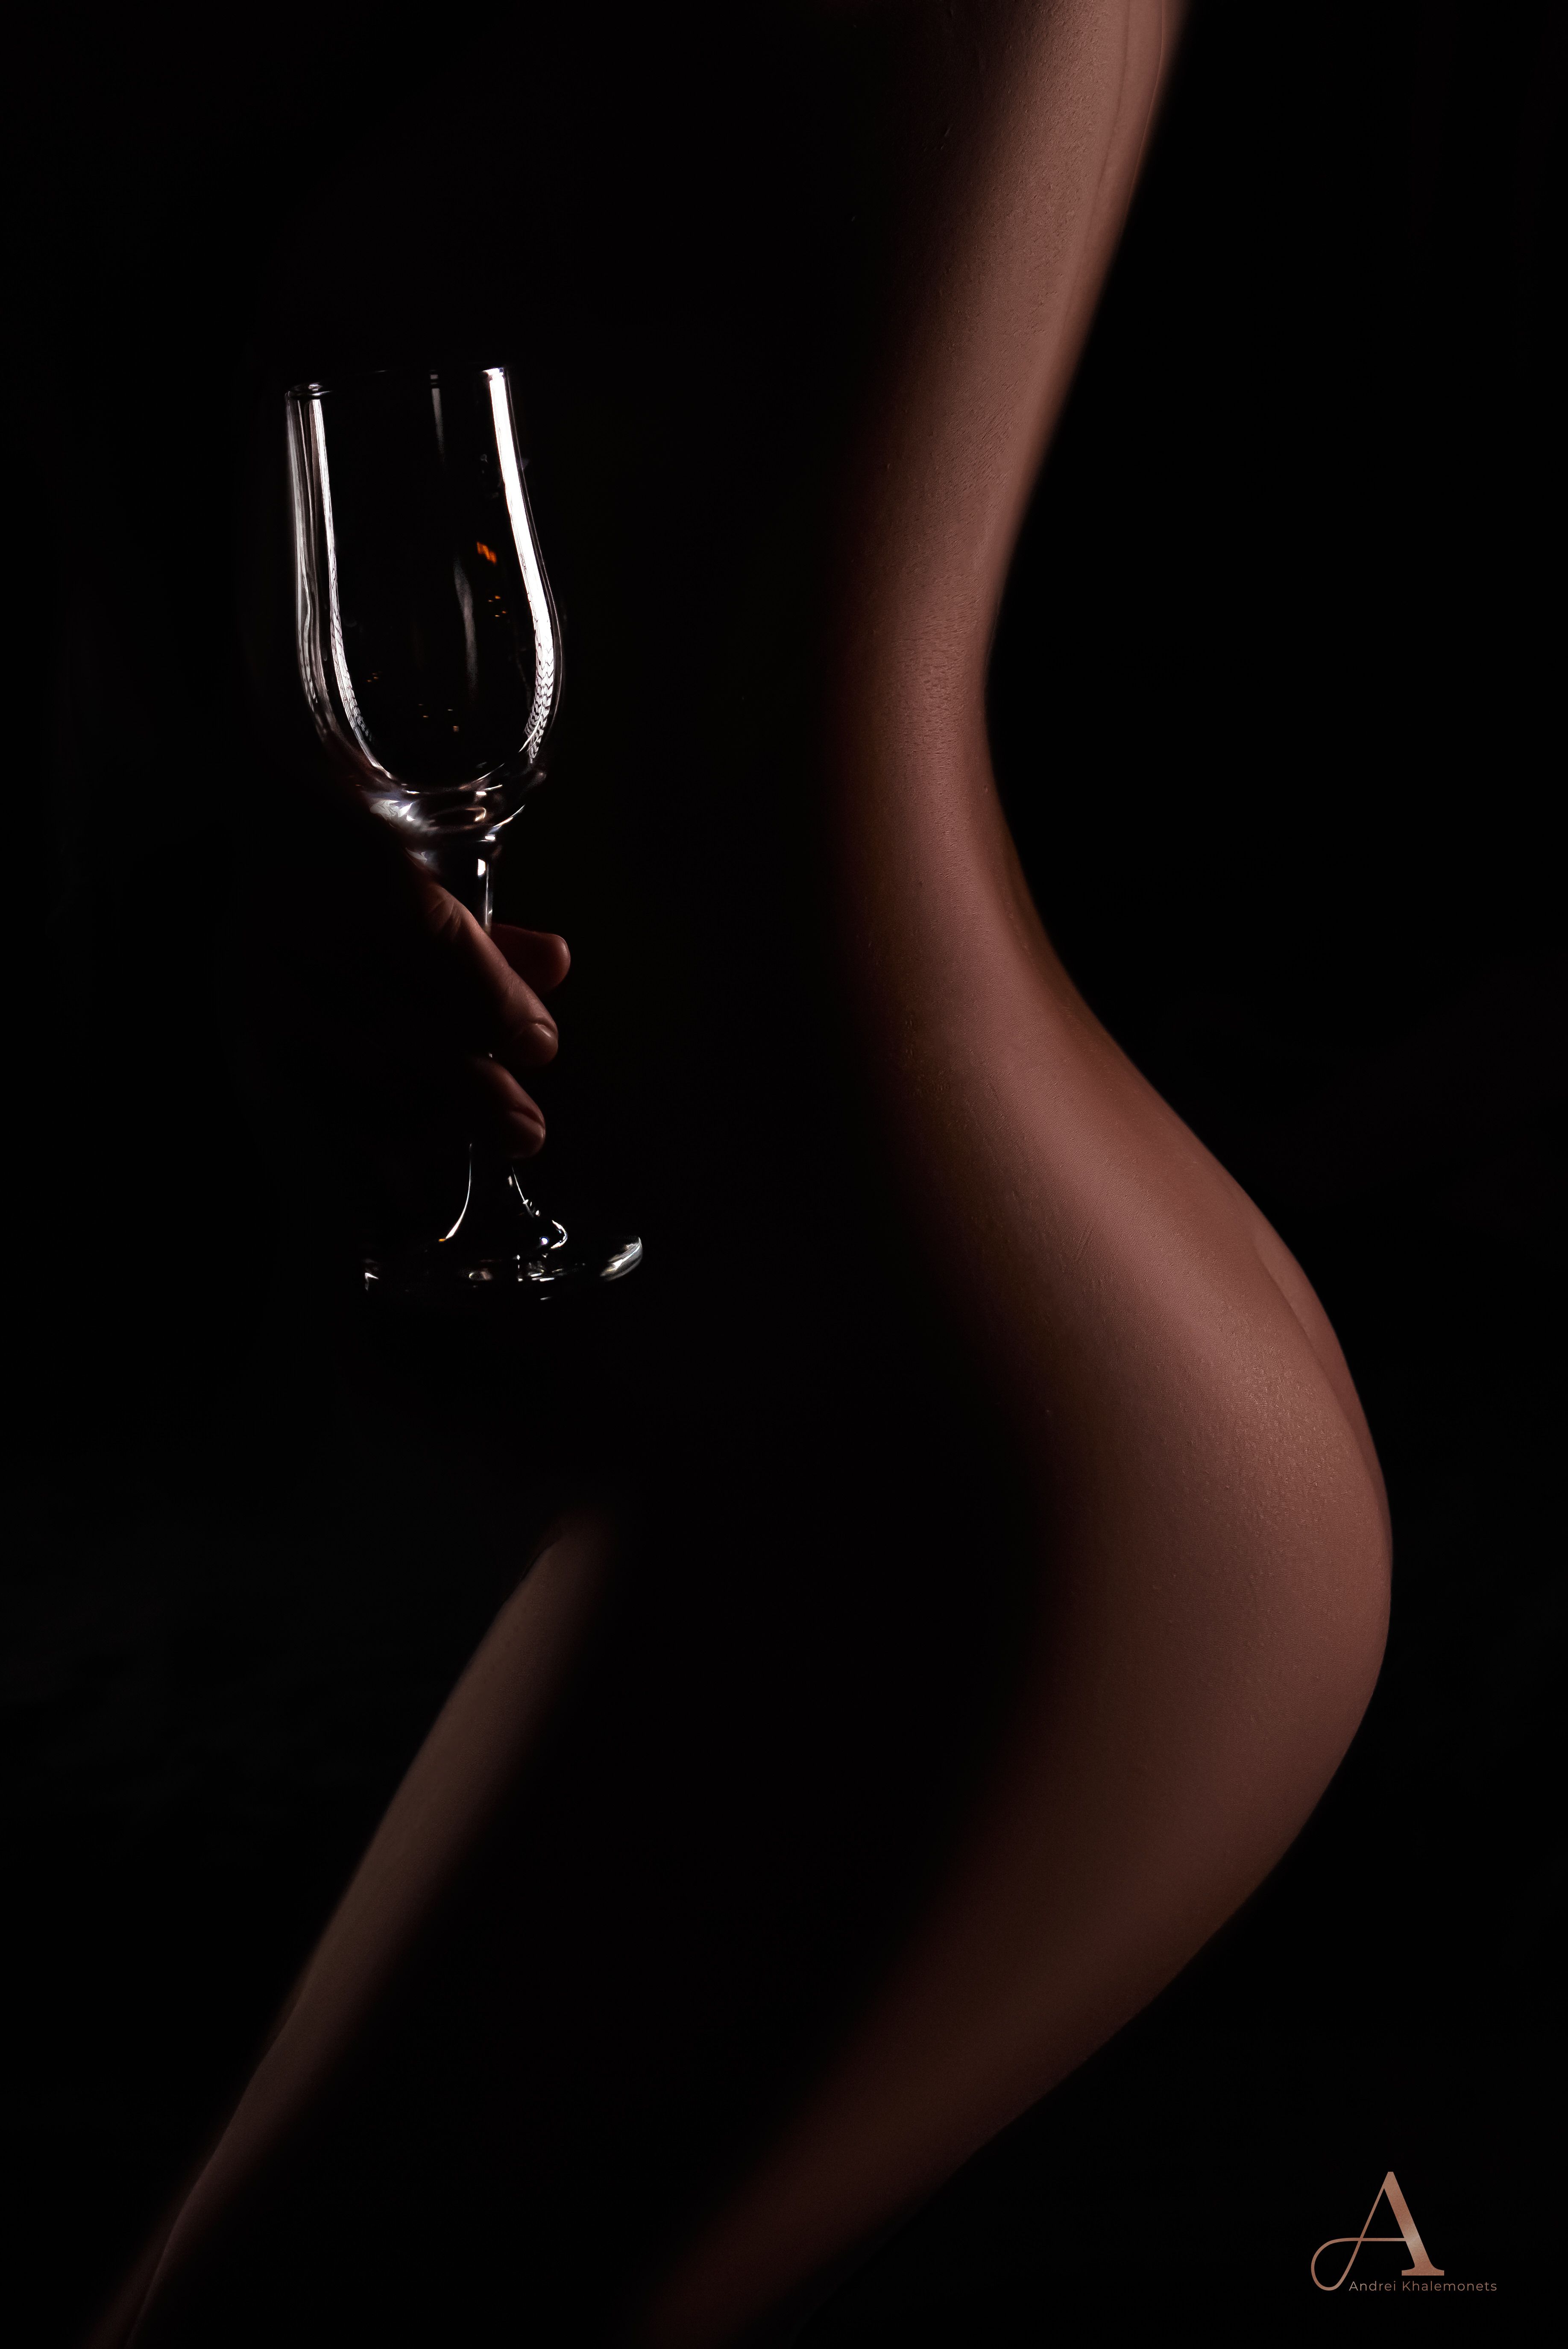 nude female silhouette with a glass in hand, shot in low key, Андрей Халемонец